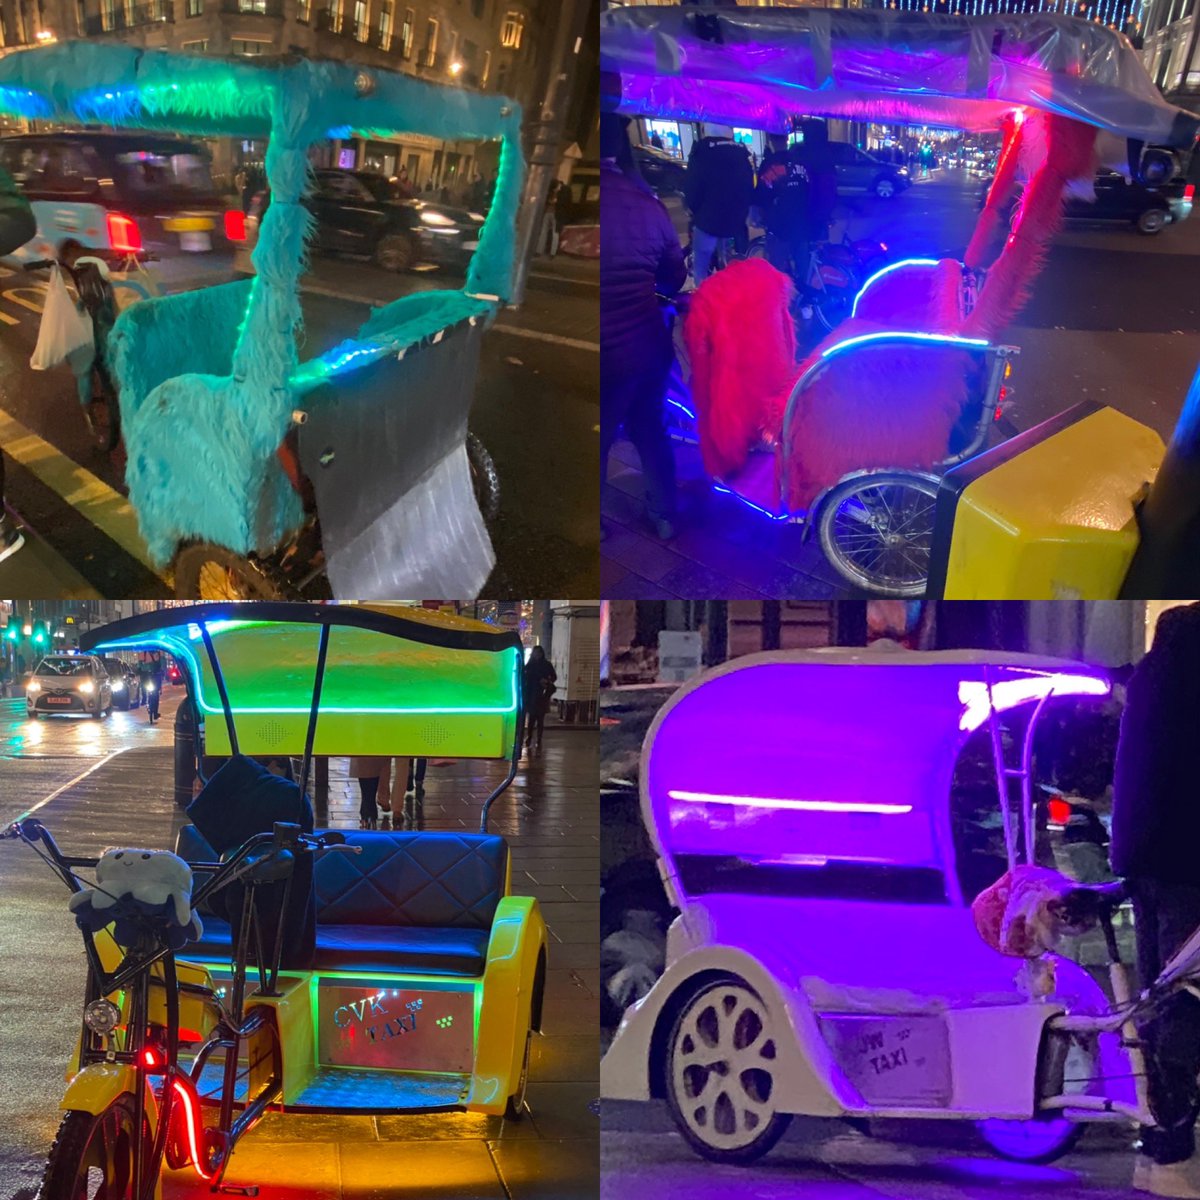 On Saturday I again worked nights with staff from @CityWestminster 

As a result of our patrols 13 pedi-cab riders were reported for committing noise pollution offences. They will now receive a summons to appear in court

We covered #Soho, #OxfordSt, #CoventGarden, #LeicesterSq